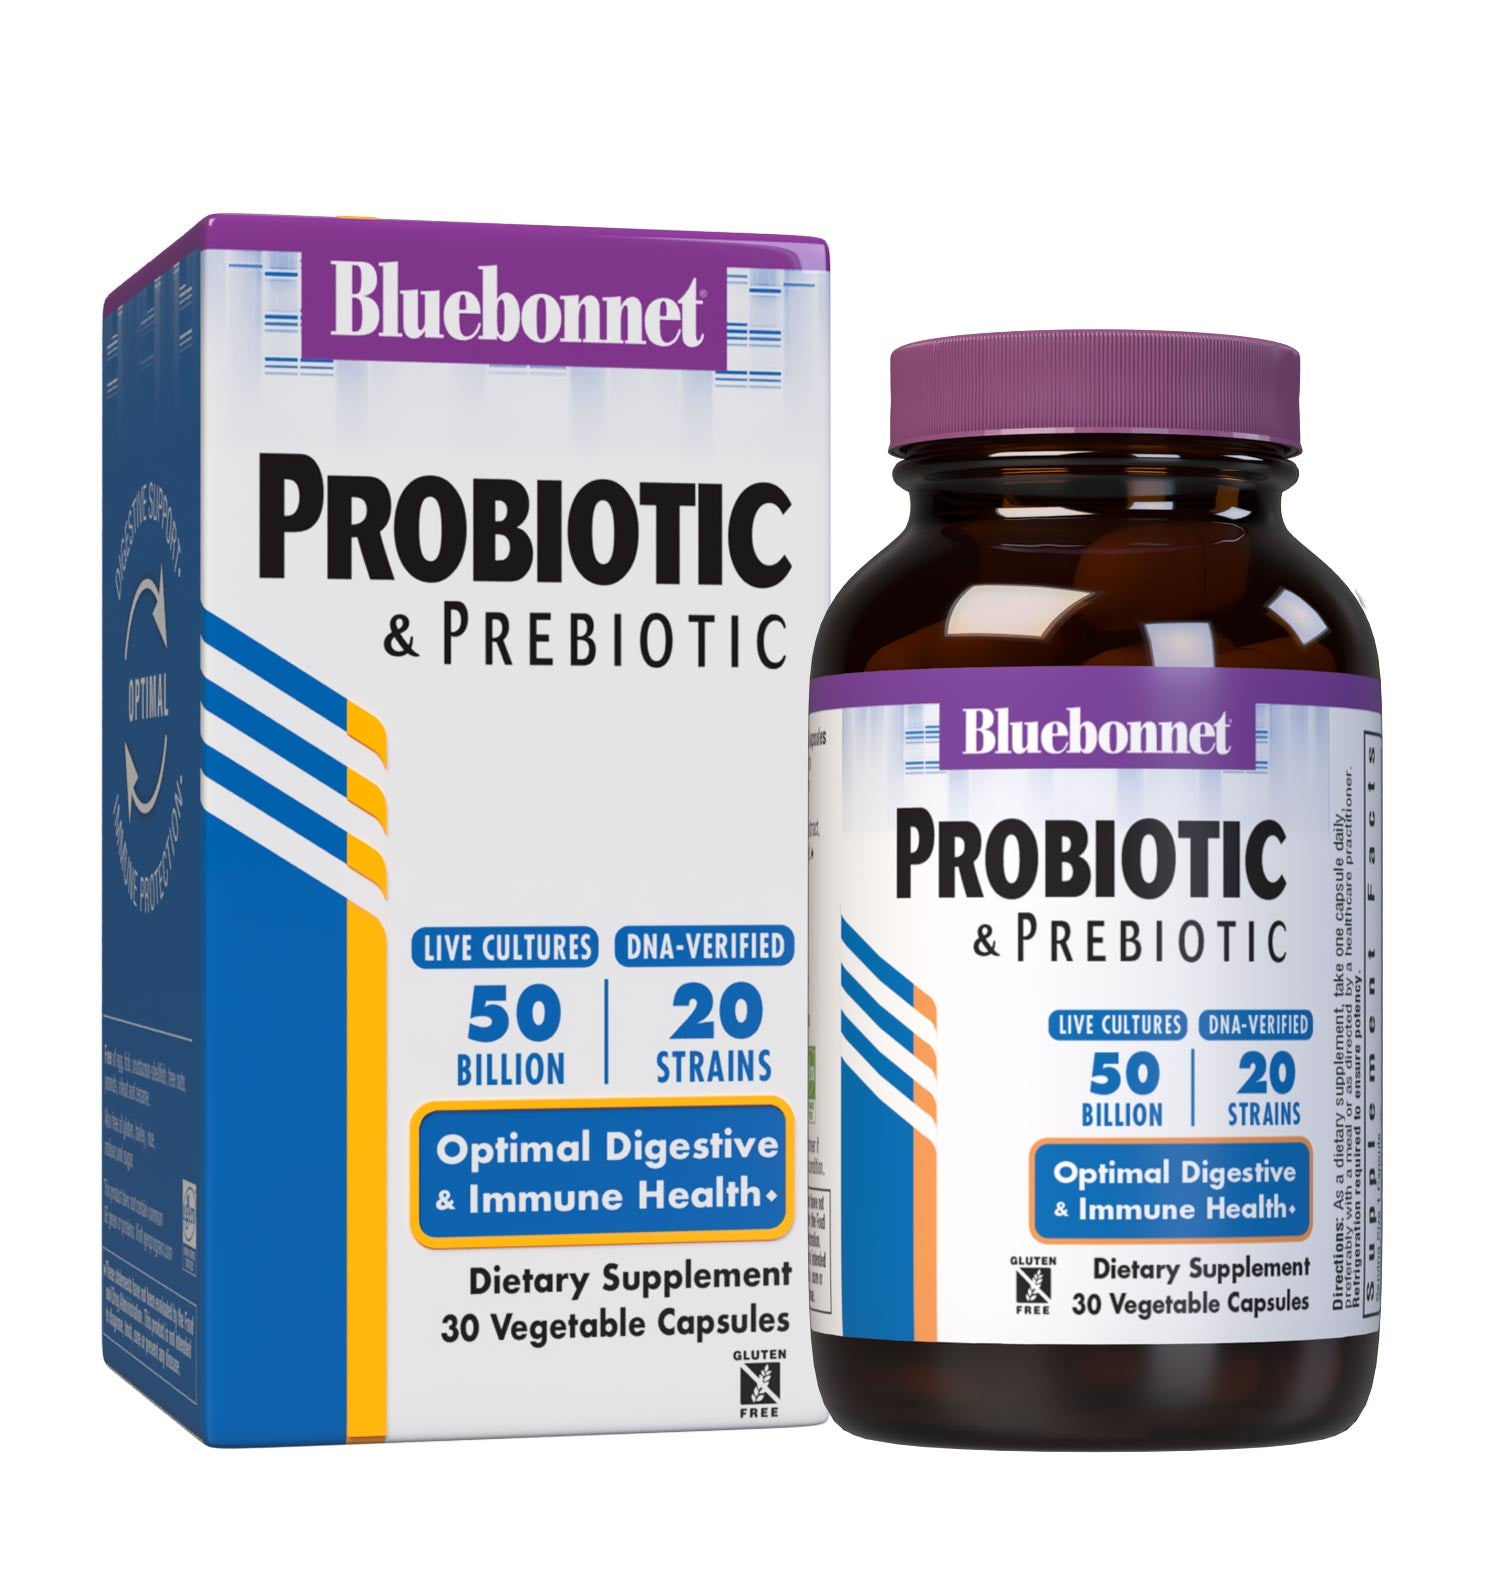 Bluebonnet’s Probiotic & Prebiotic 30 Vegetable Capsules are formulated with 50 billion viable cultures from 20 DNA-verified, scientifically supported strains. This unique, science-based probiotic formula includes the prebiotic inulin from chicory root extract, to assist the growth of friendly bacterium in the gut. Bottle with box. #size_30 count